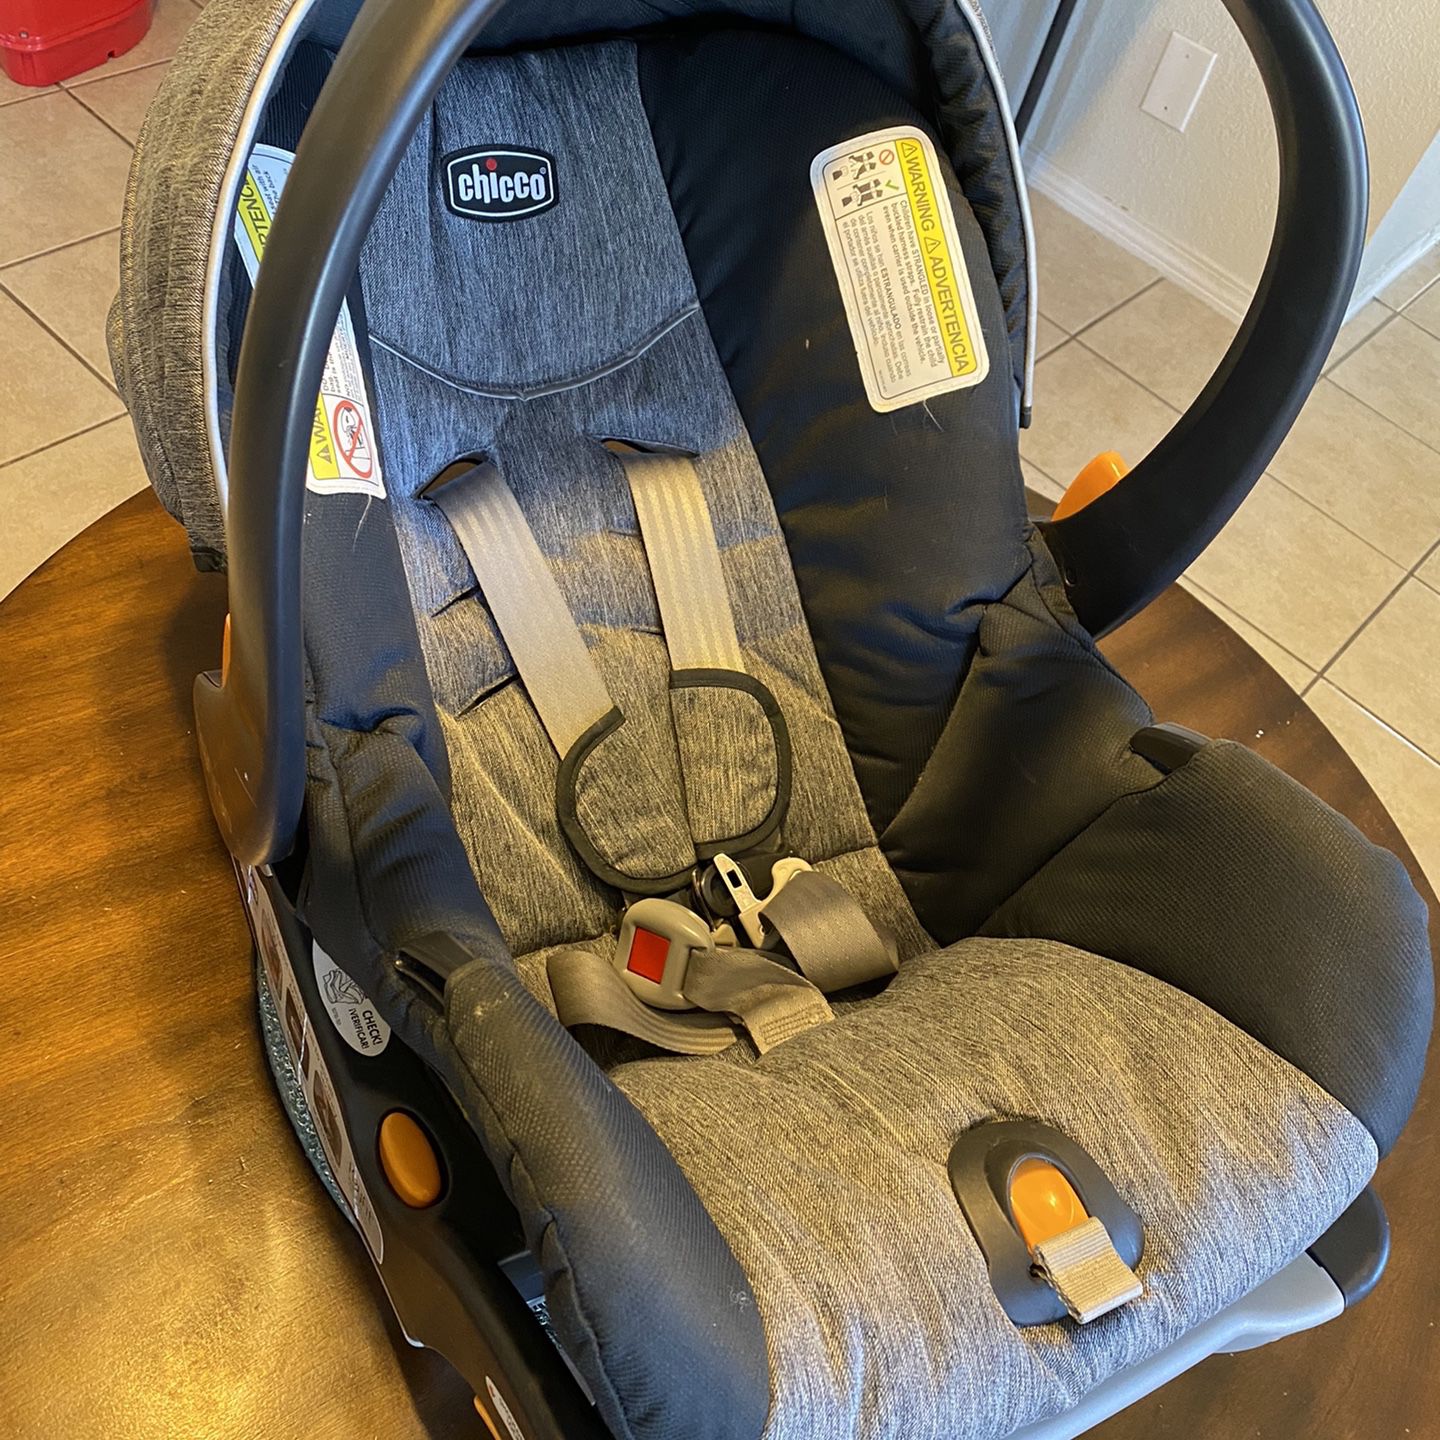 Chicco Brand infant car seat Baby 0-18 Months